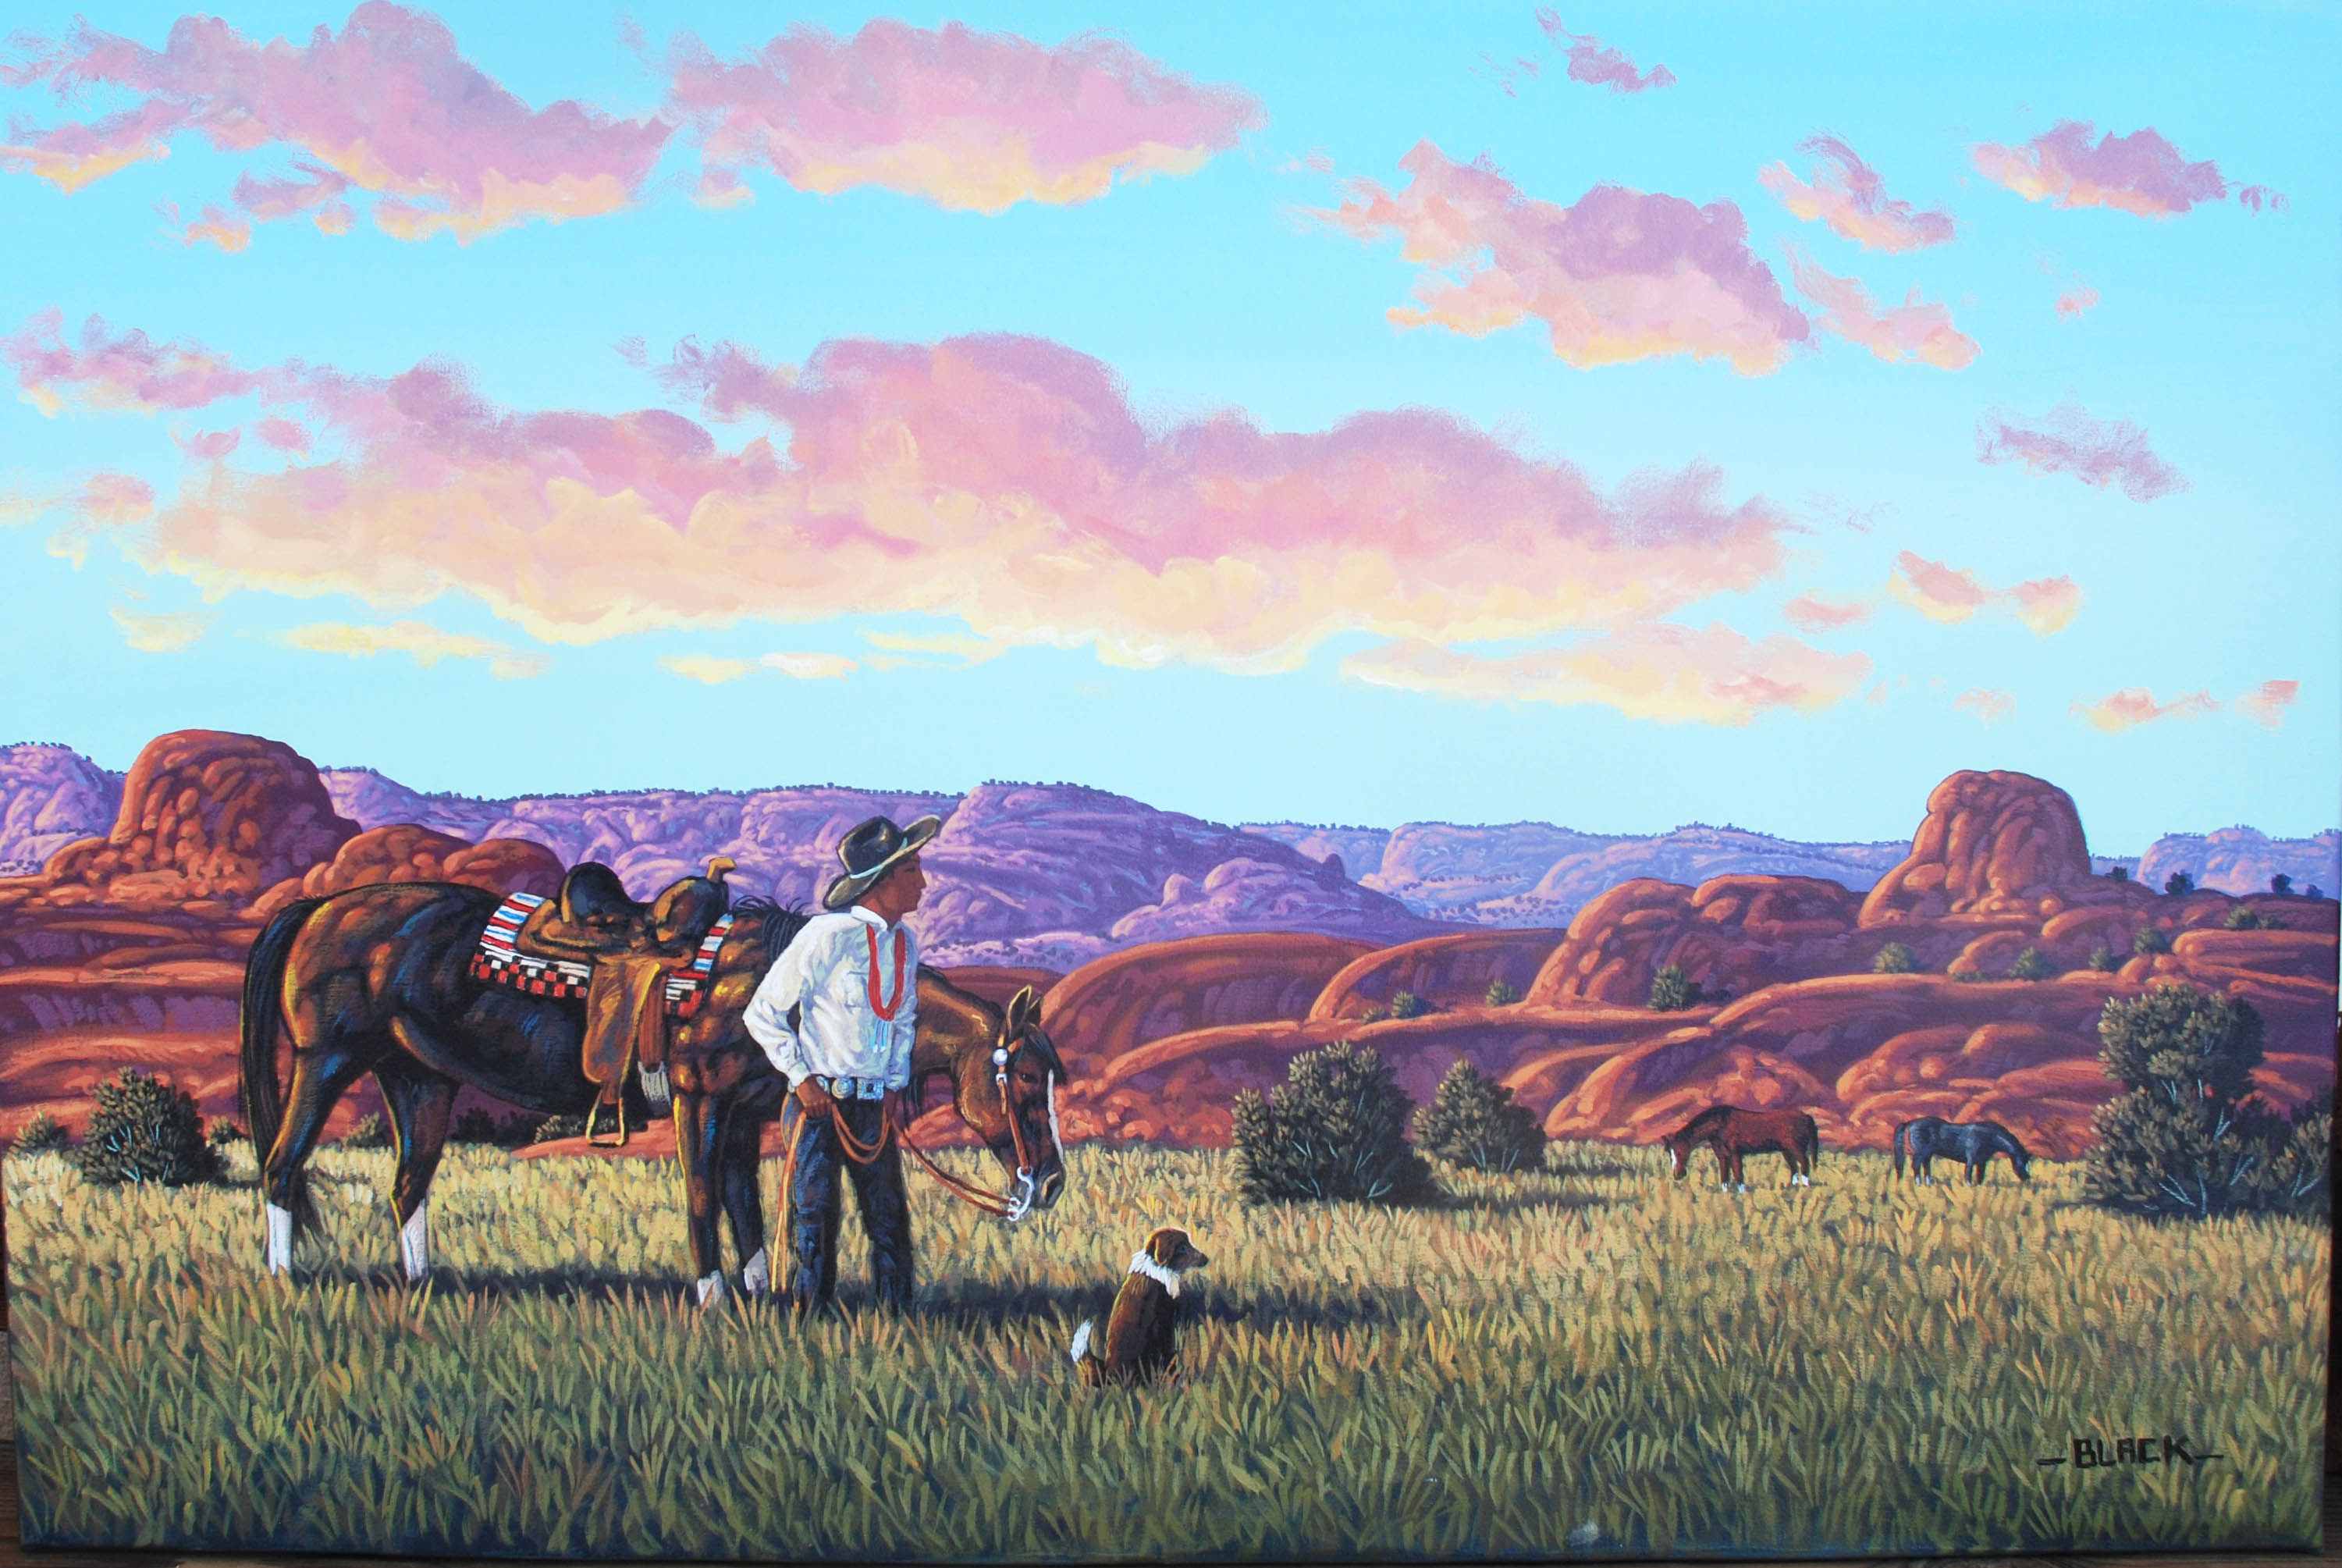 Jack Black | Navajo Reservation Painting | Penfield Gallery of Indian Arts | Albuquerque, New Mexico